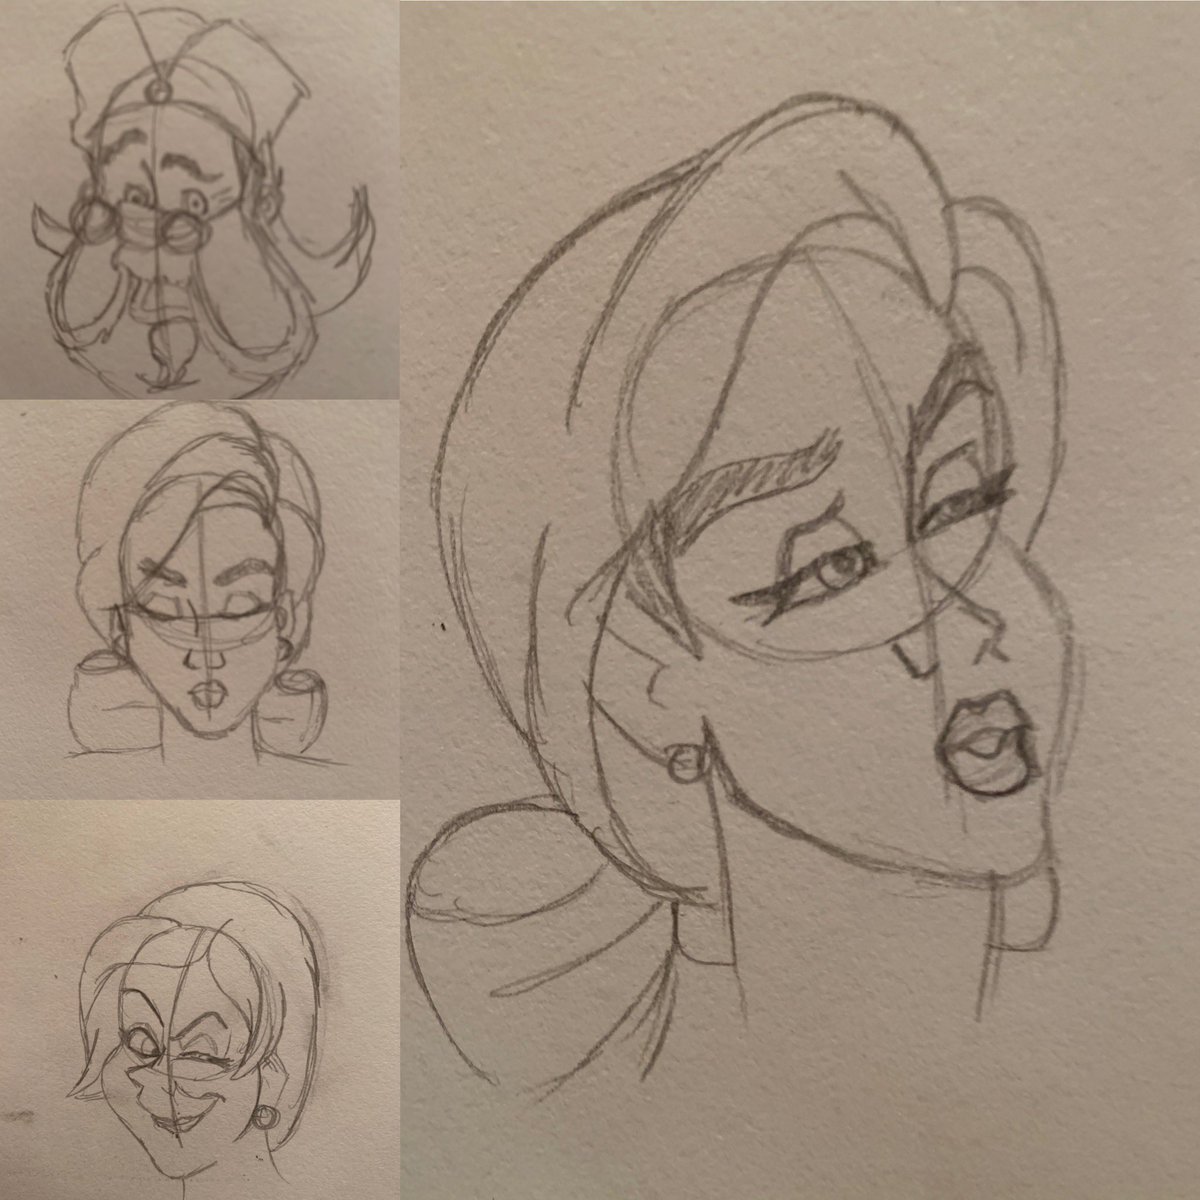 I did a heap of expression studies from the movie Anastasia. These are some of my favourites. #anastasia #anastasia1997 #anastasiamovie #art #drawing #studies #expressionstudy